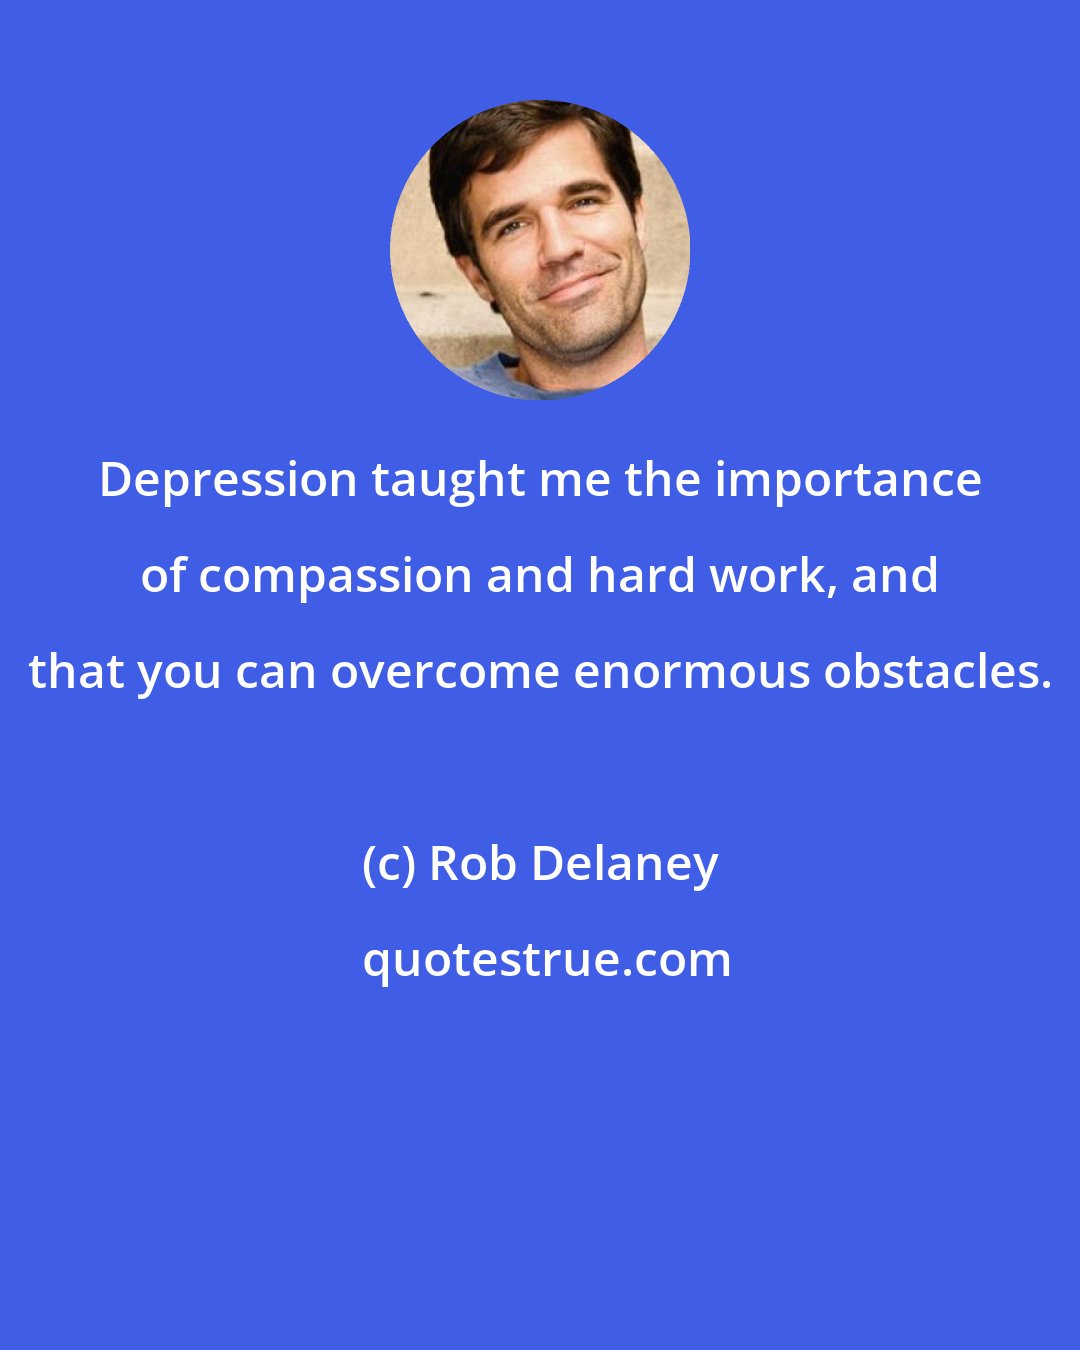 Rob Delaney: Depression taught me the importance of compassion and hard work, and that you can overcome enormous obstacles.